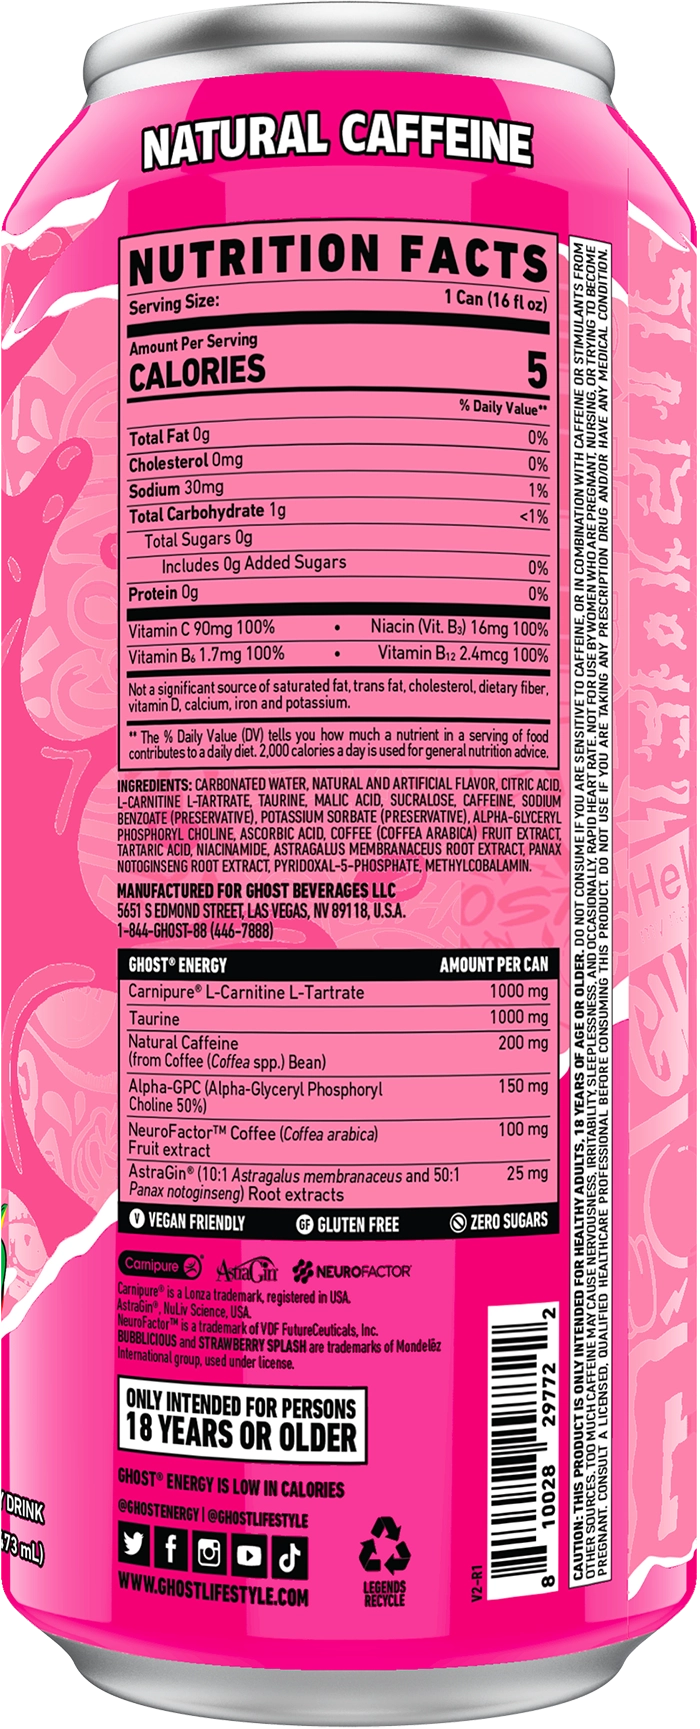 Product package Nutrition Label